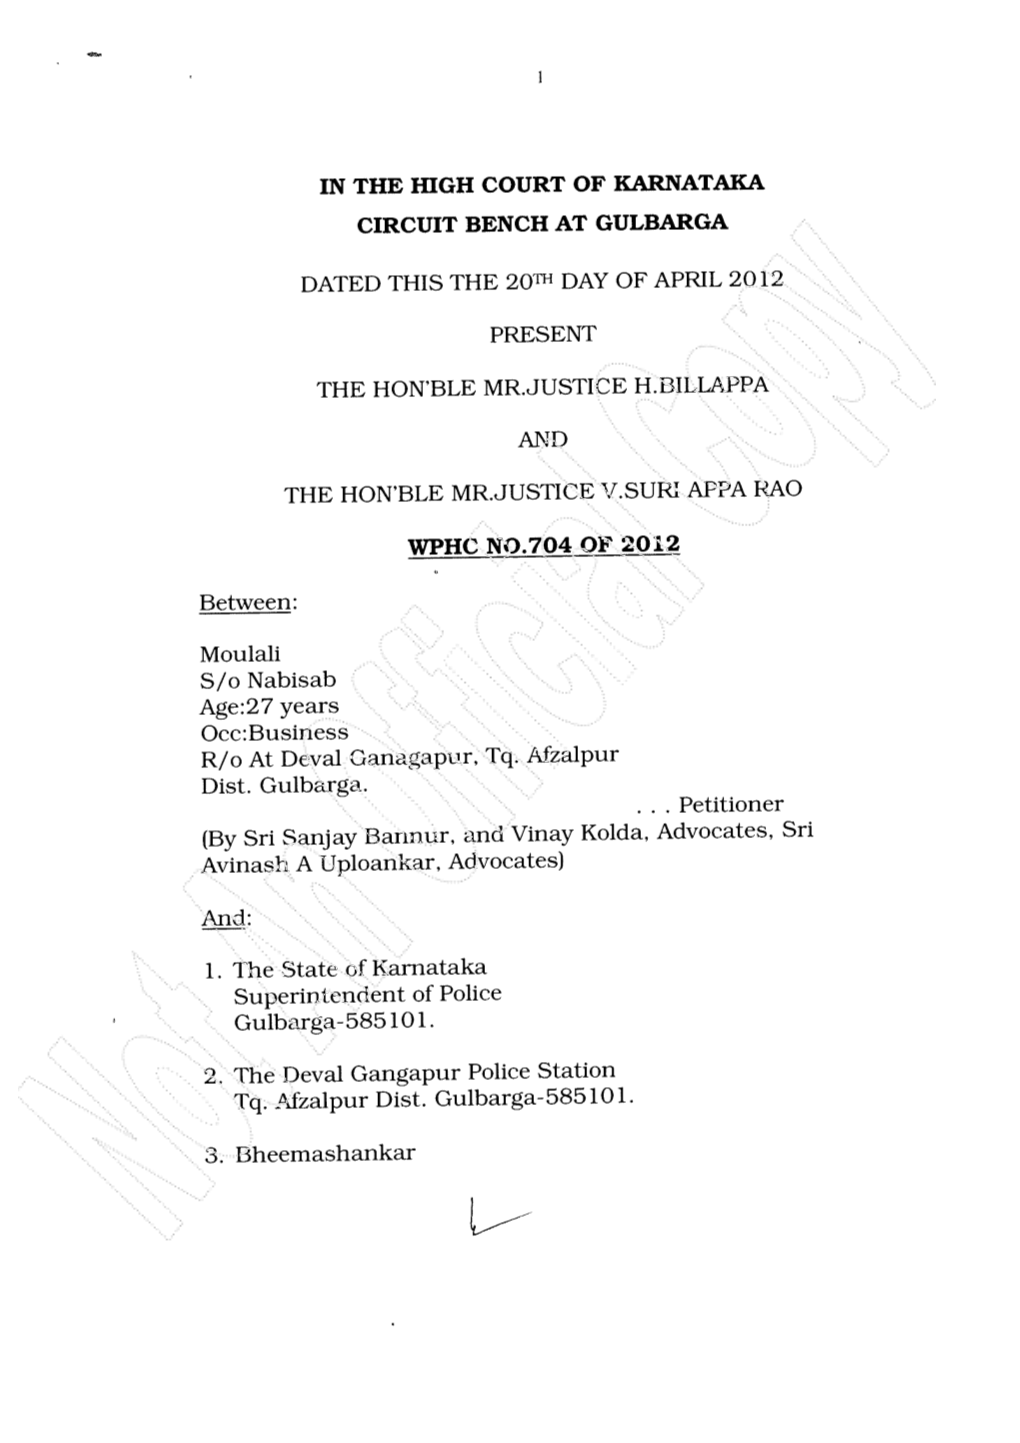 In the High Court of Karnataka Circuit Bench at Gulbarga Dated This the 20Th Day of April 2012 Present the Hon'ble Mr.Justice